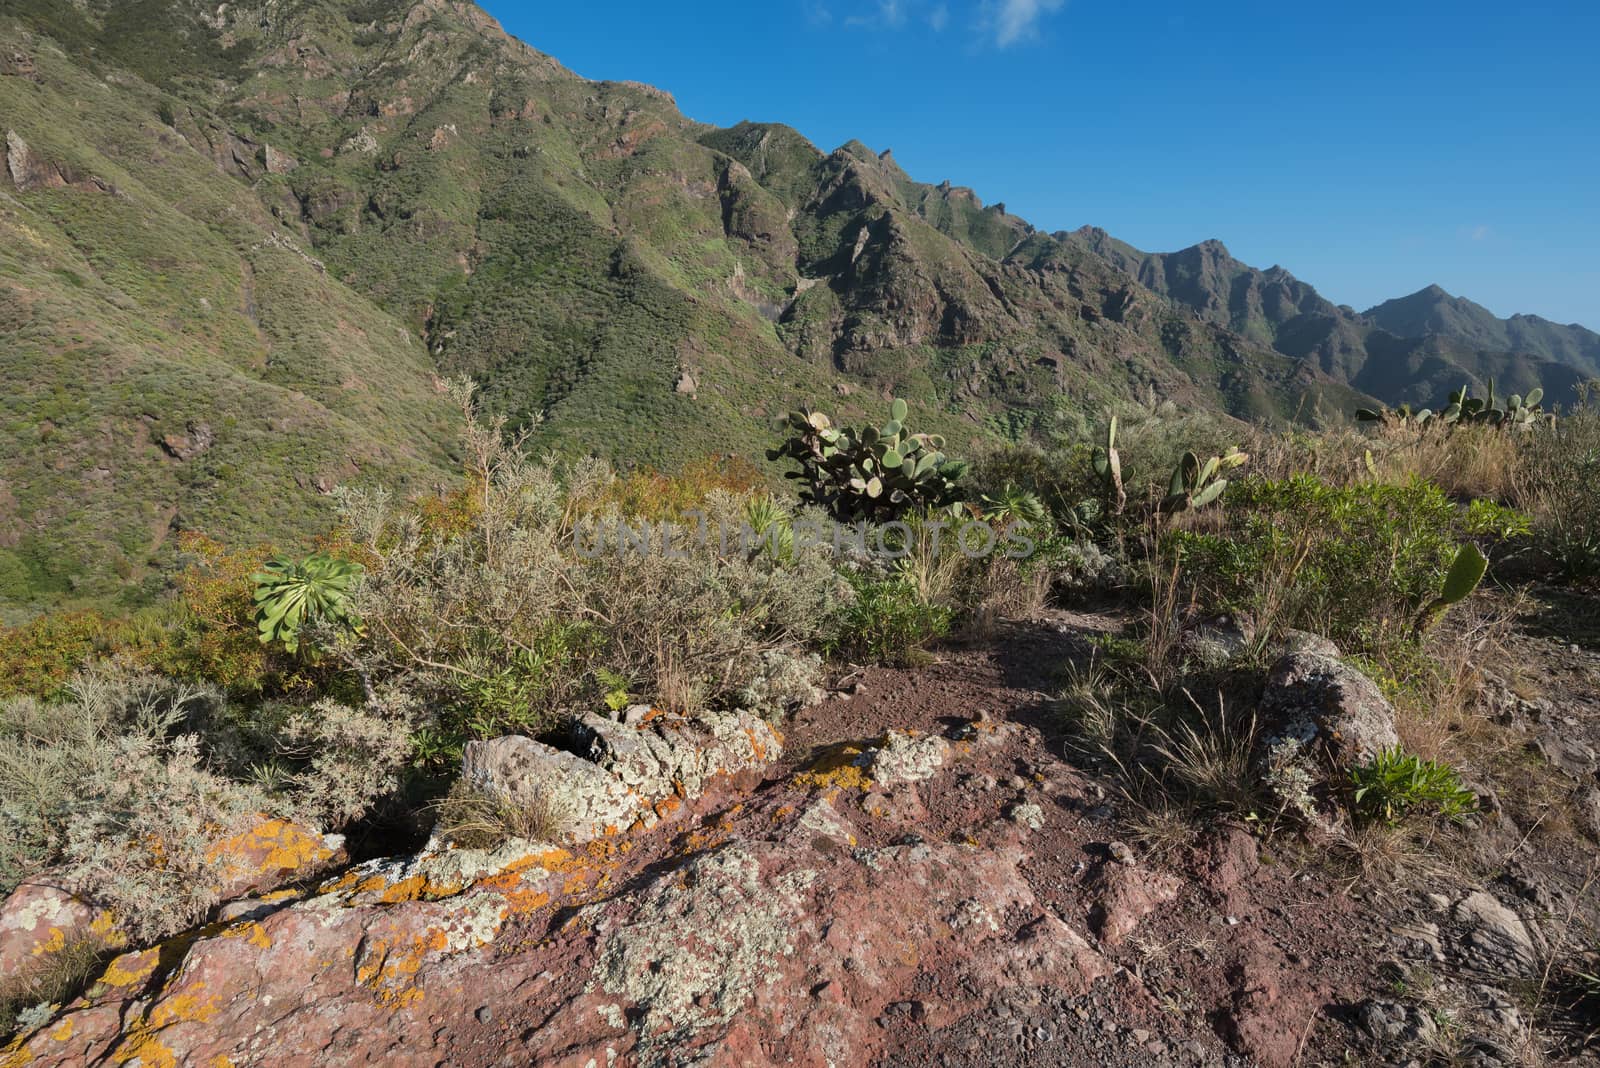 Volcanic landscape in Anaga mountains, Tenerife, Canary islands, by HERRAEZ